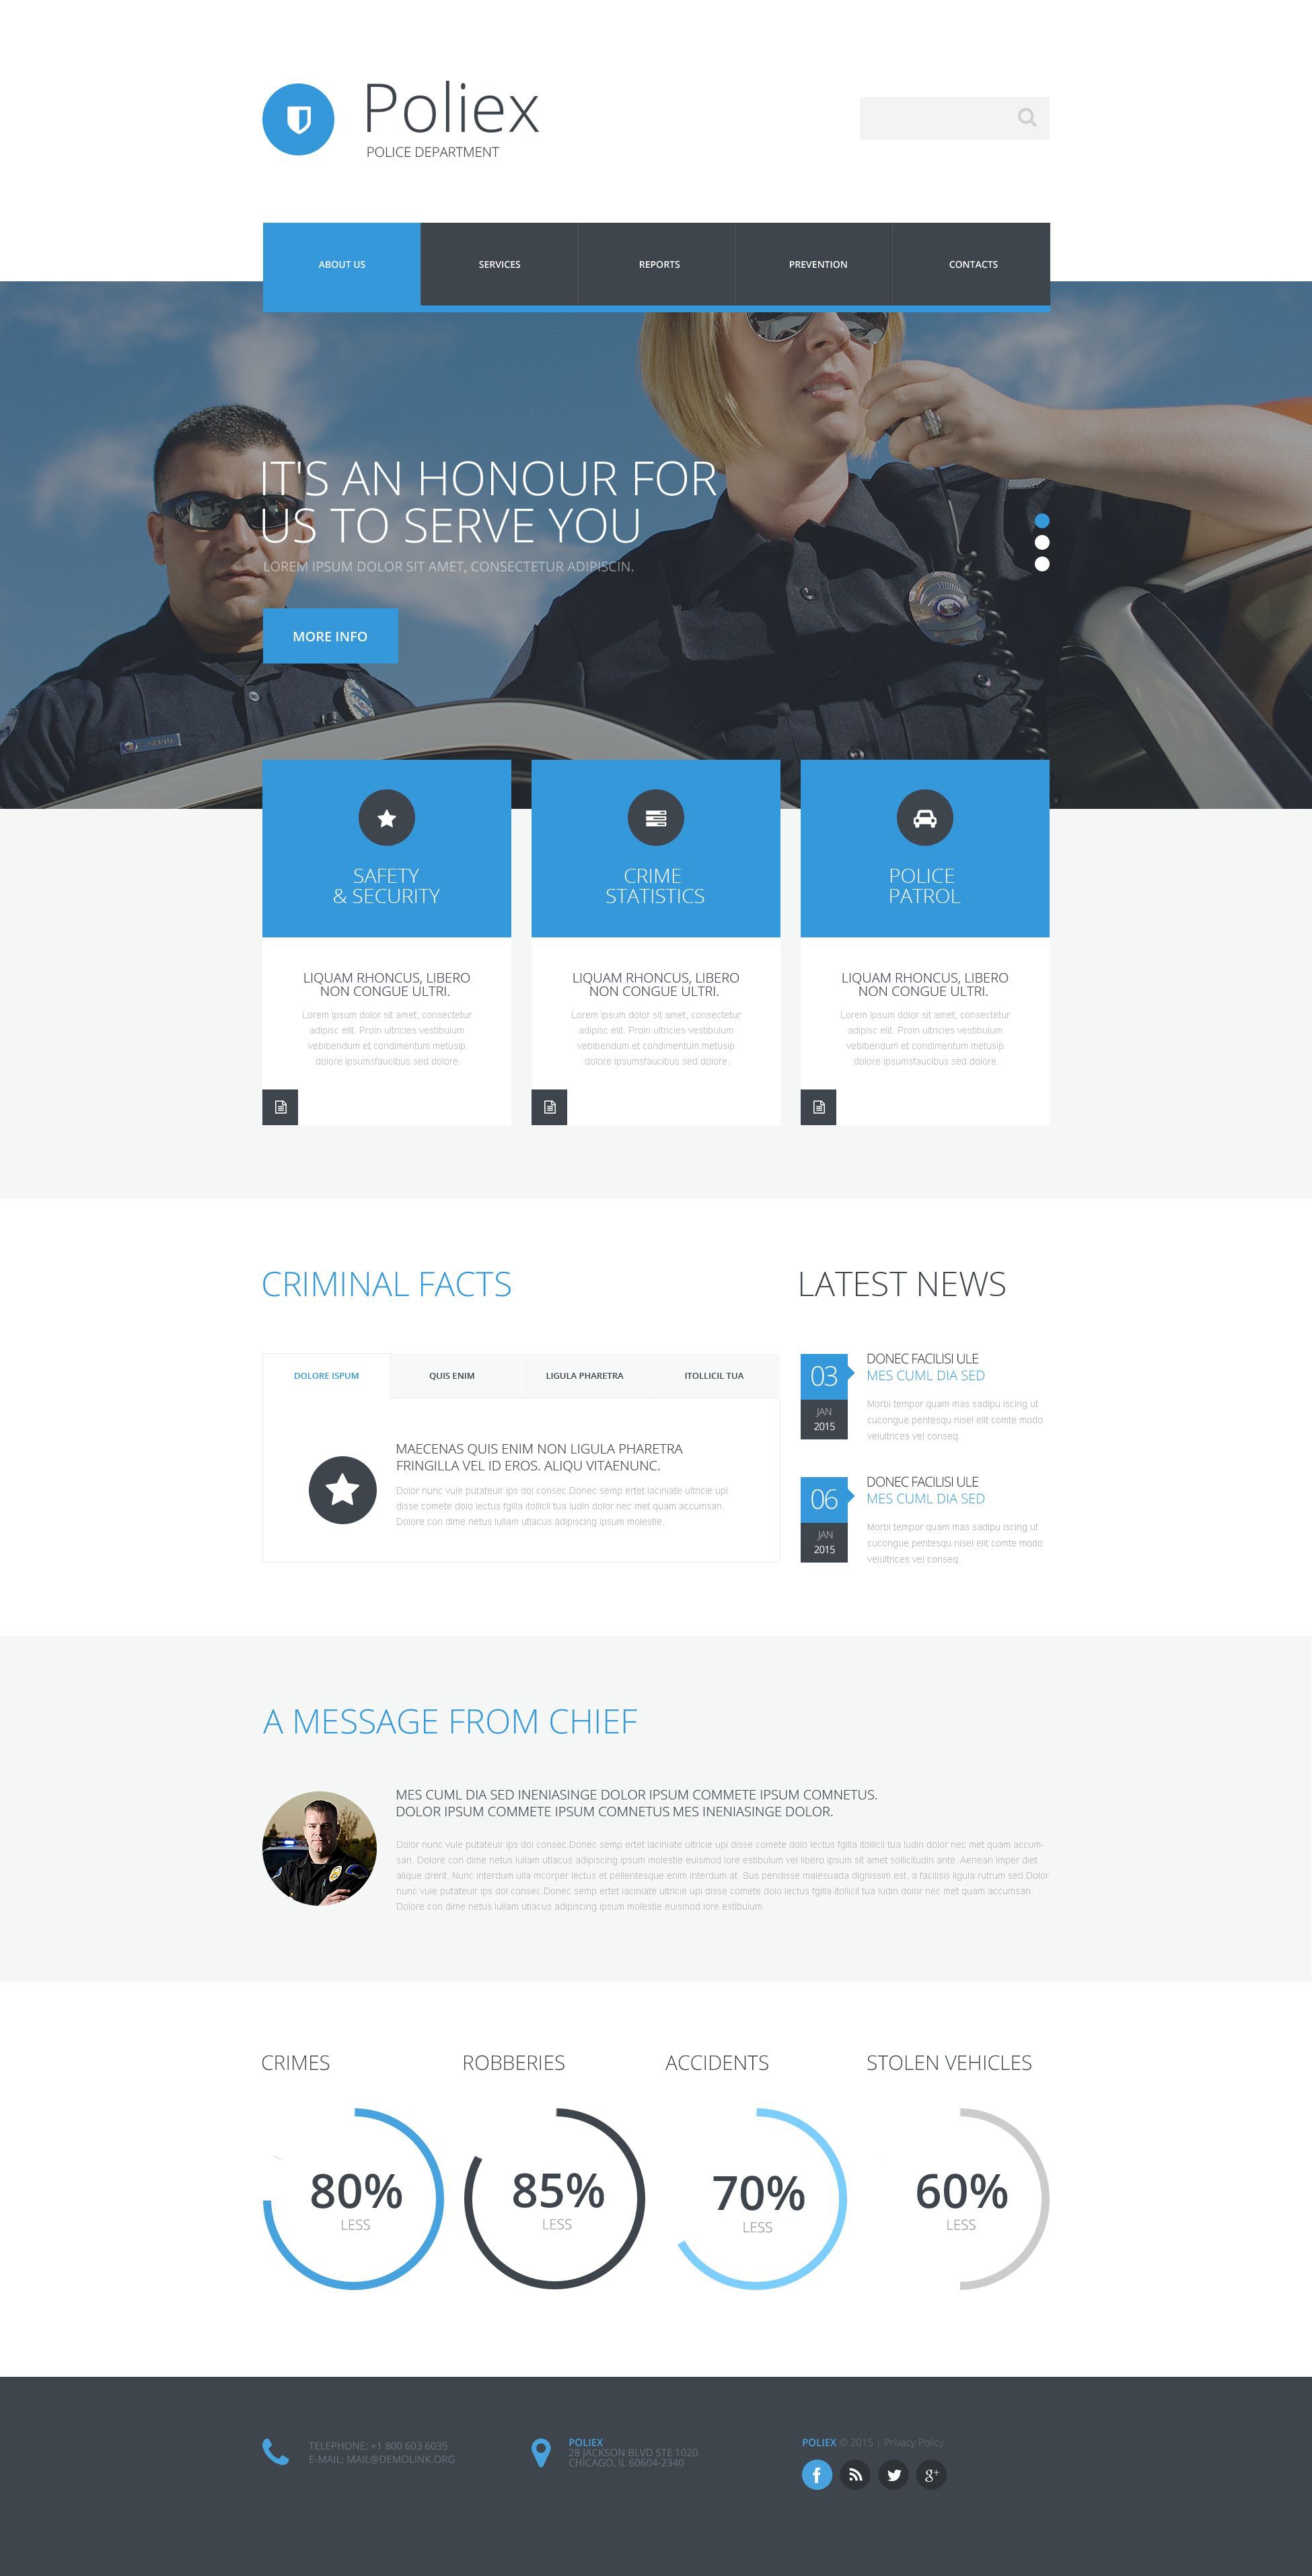 Best Poliex Police Responsive Javascript Animated Design #21 Within Reporting Website Templates